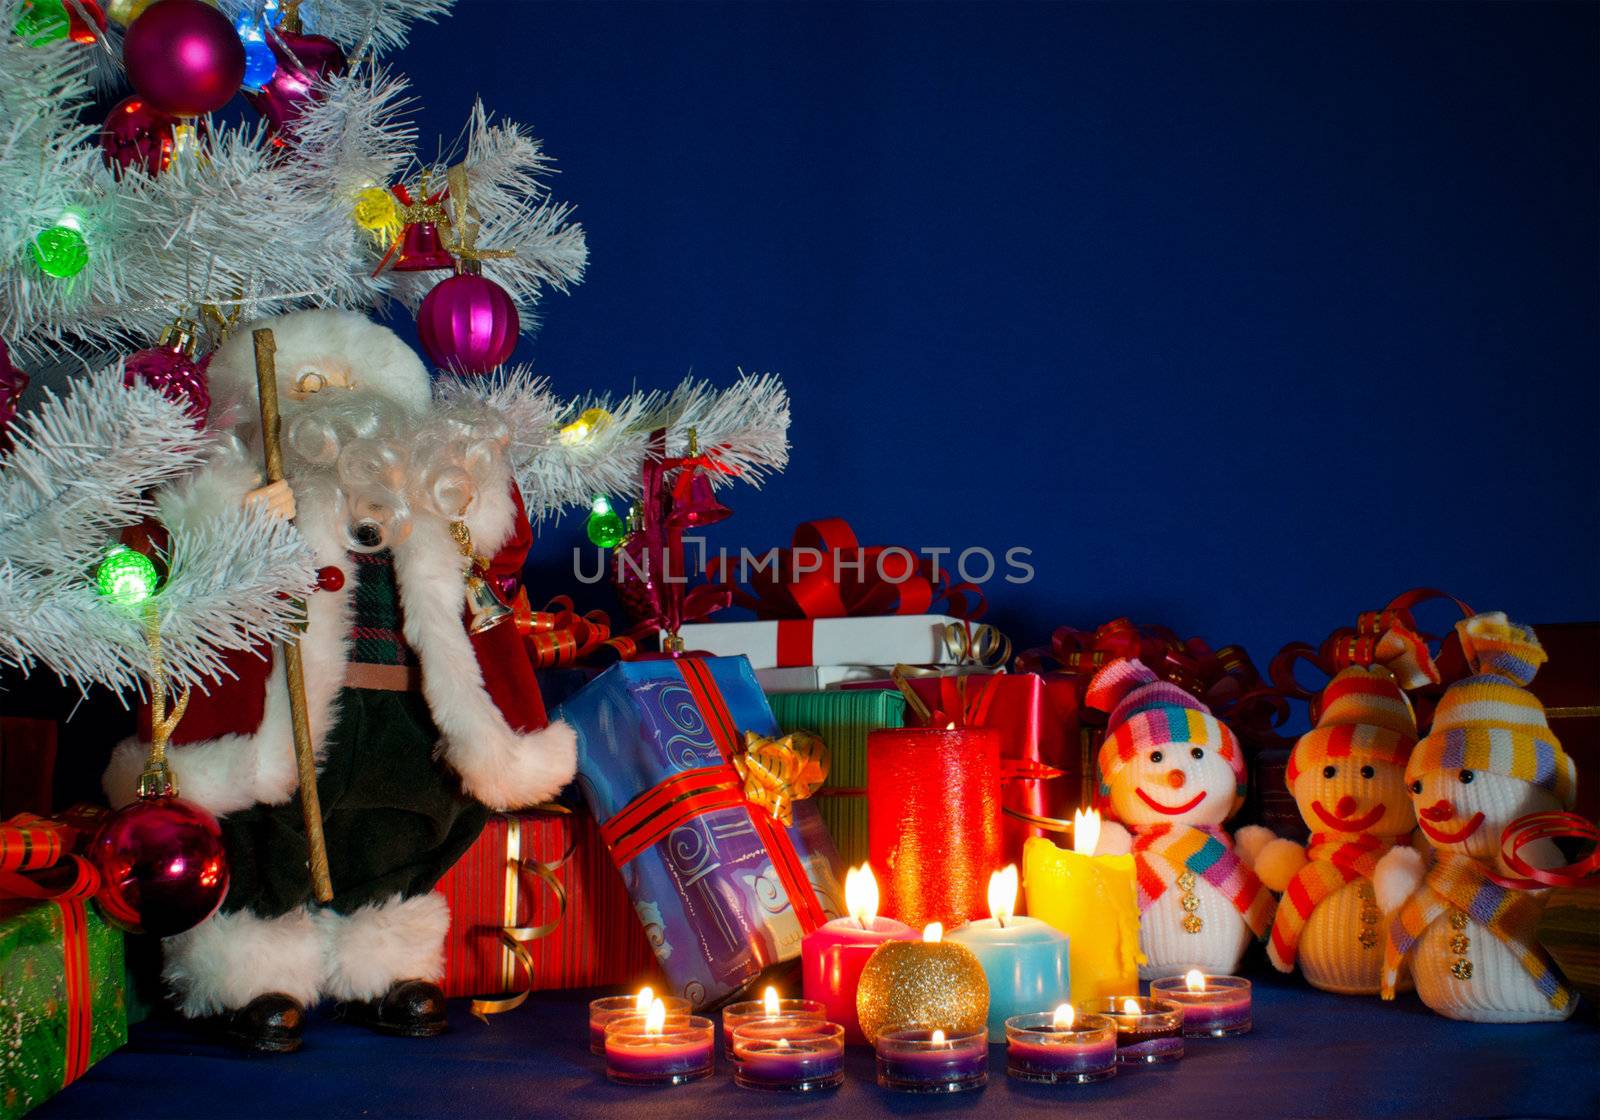 Three snowmen in front of the Christmas presents and burning candles